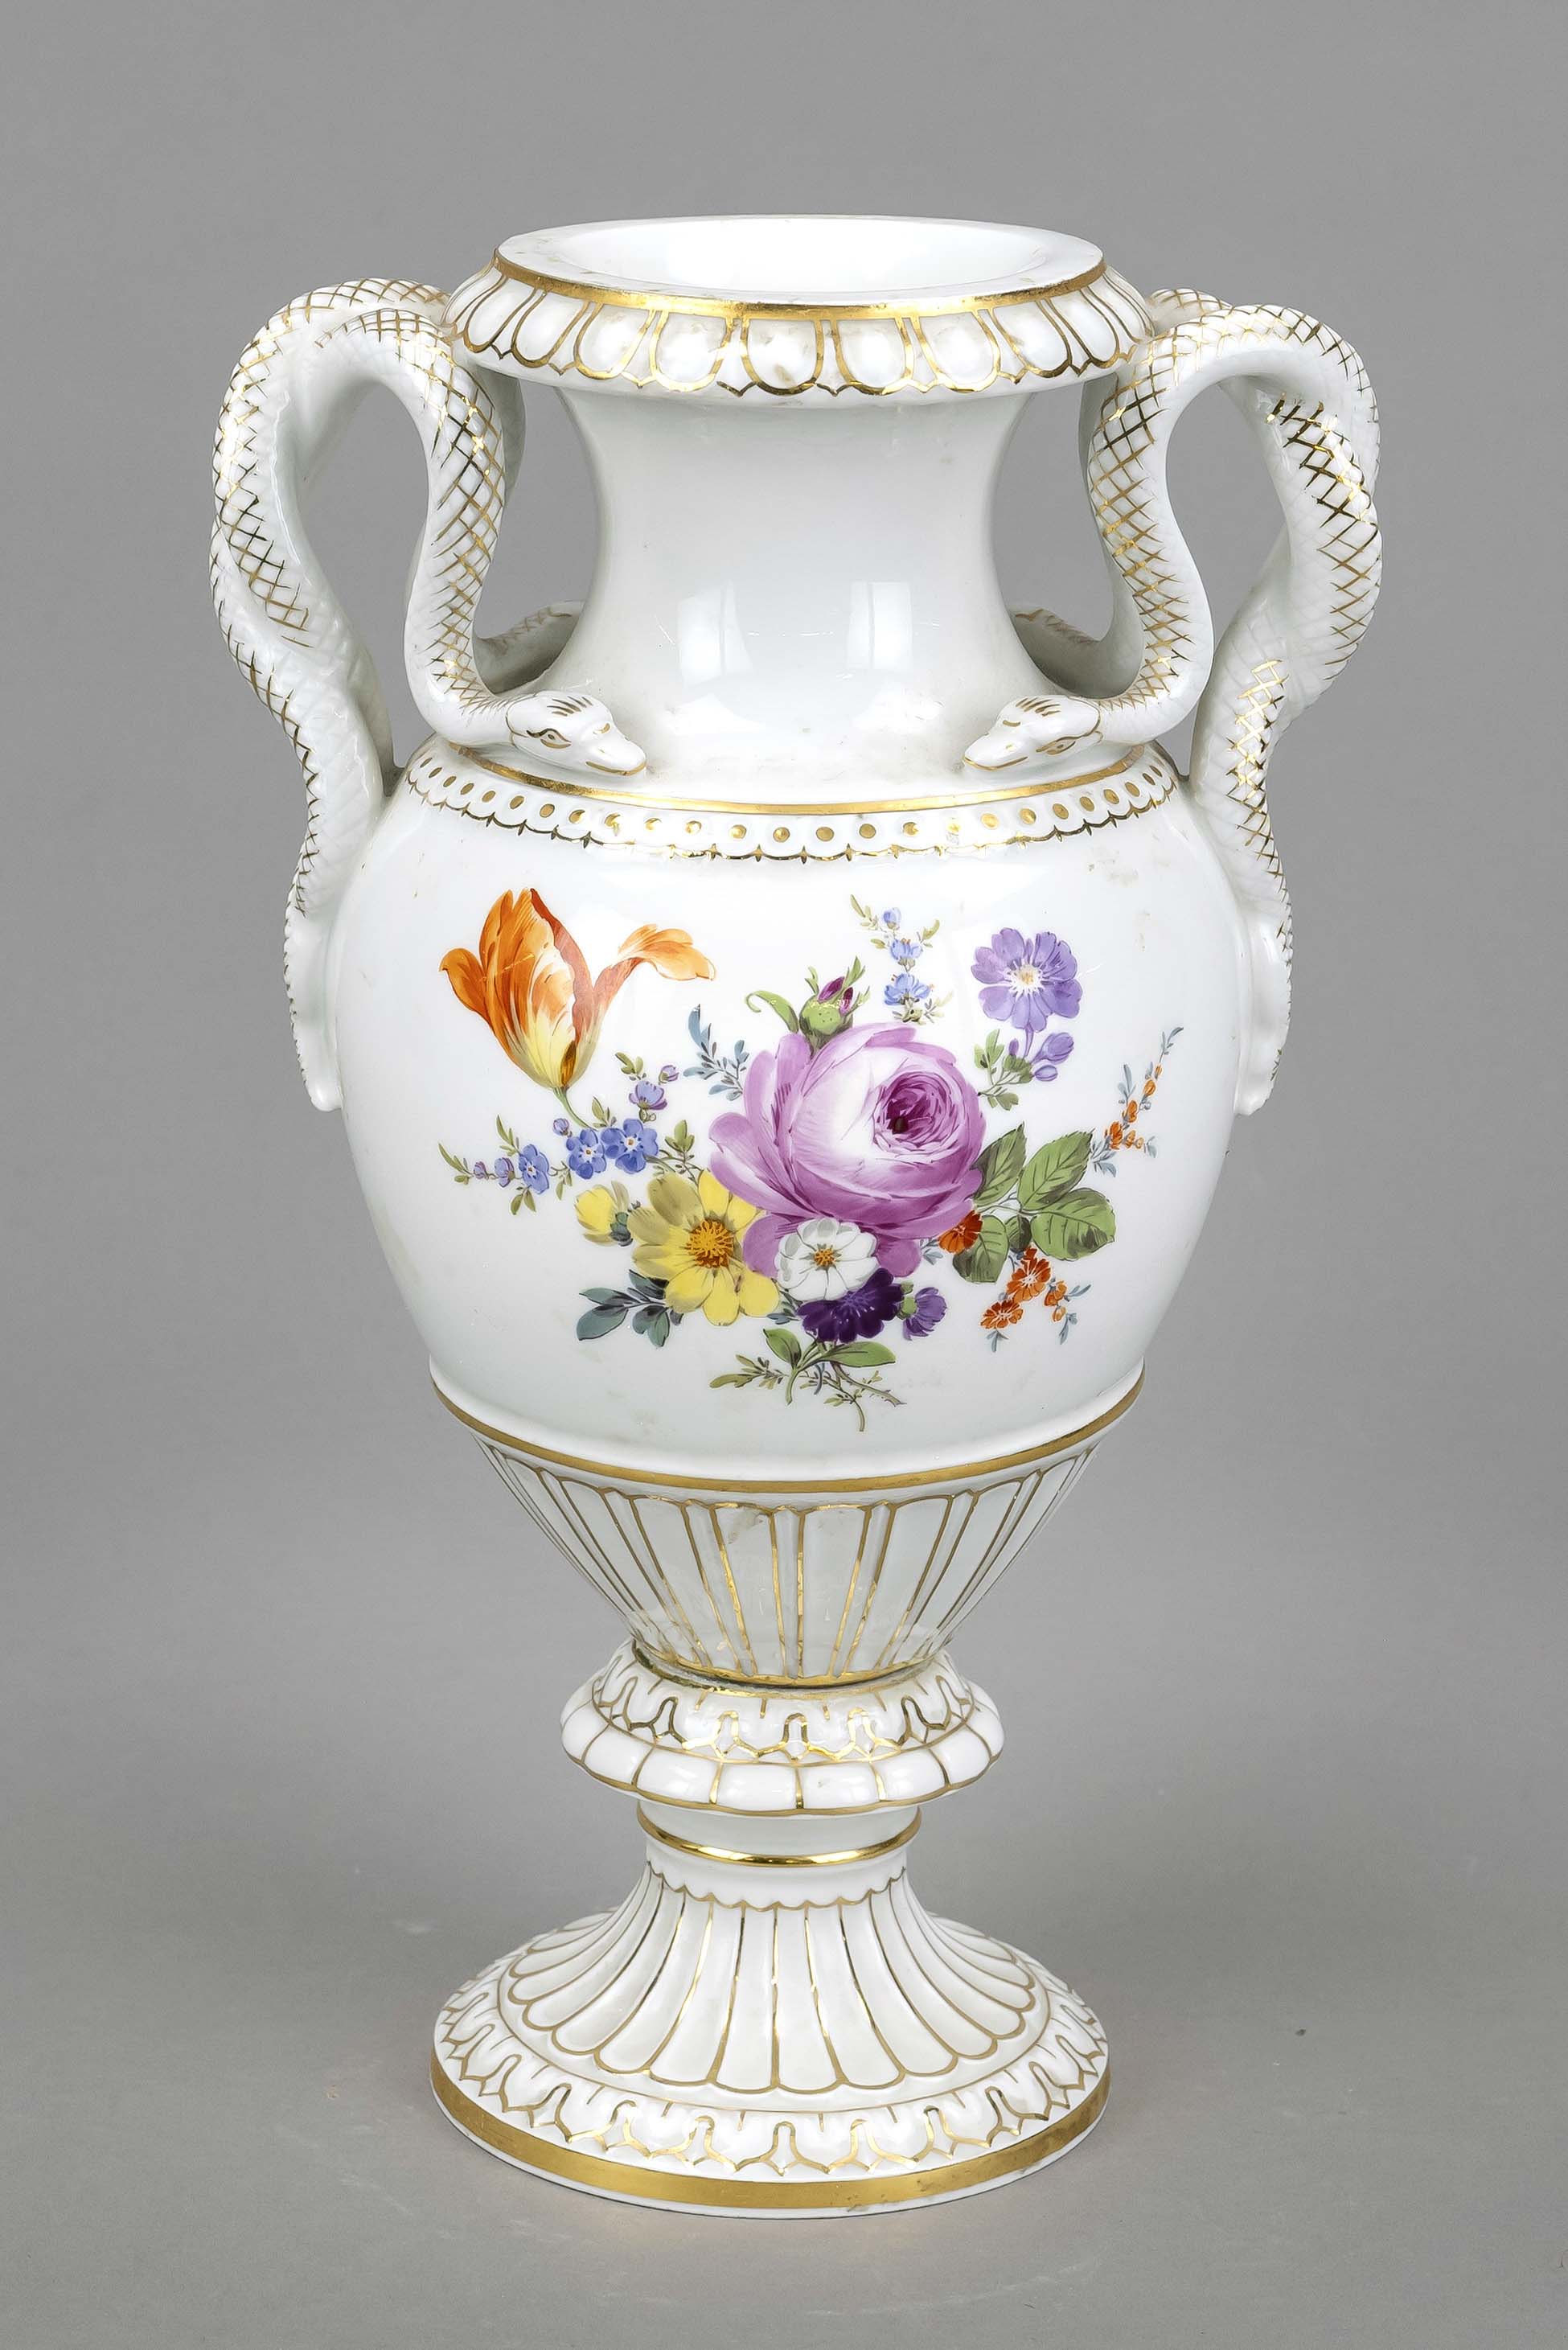 Snake-handled vase, Meissen, mark after 1934, 1st choice, amphora form with side handles in the